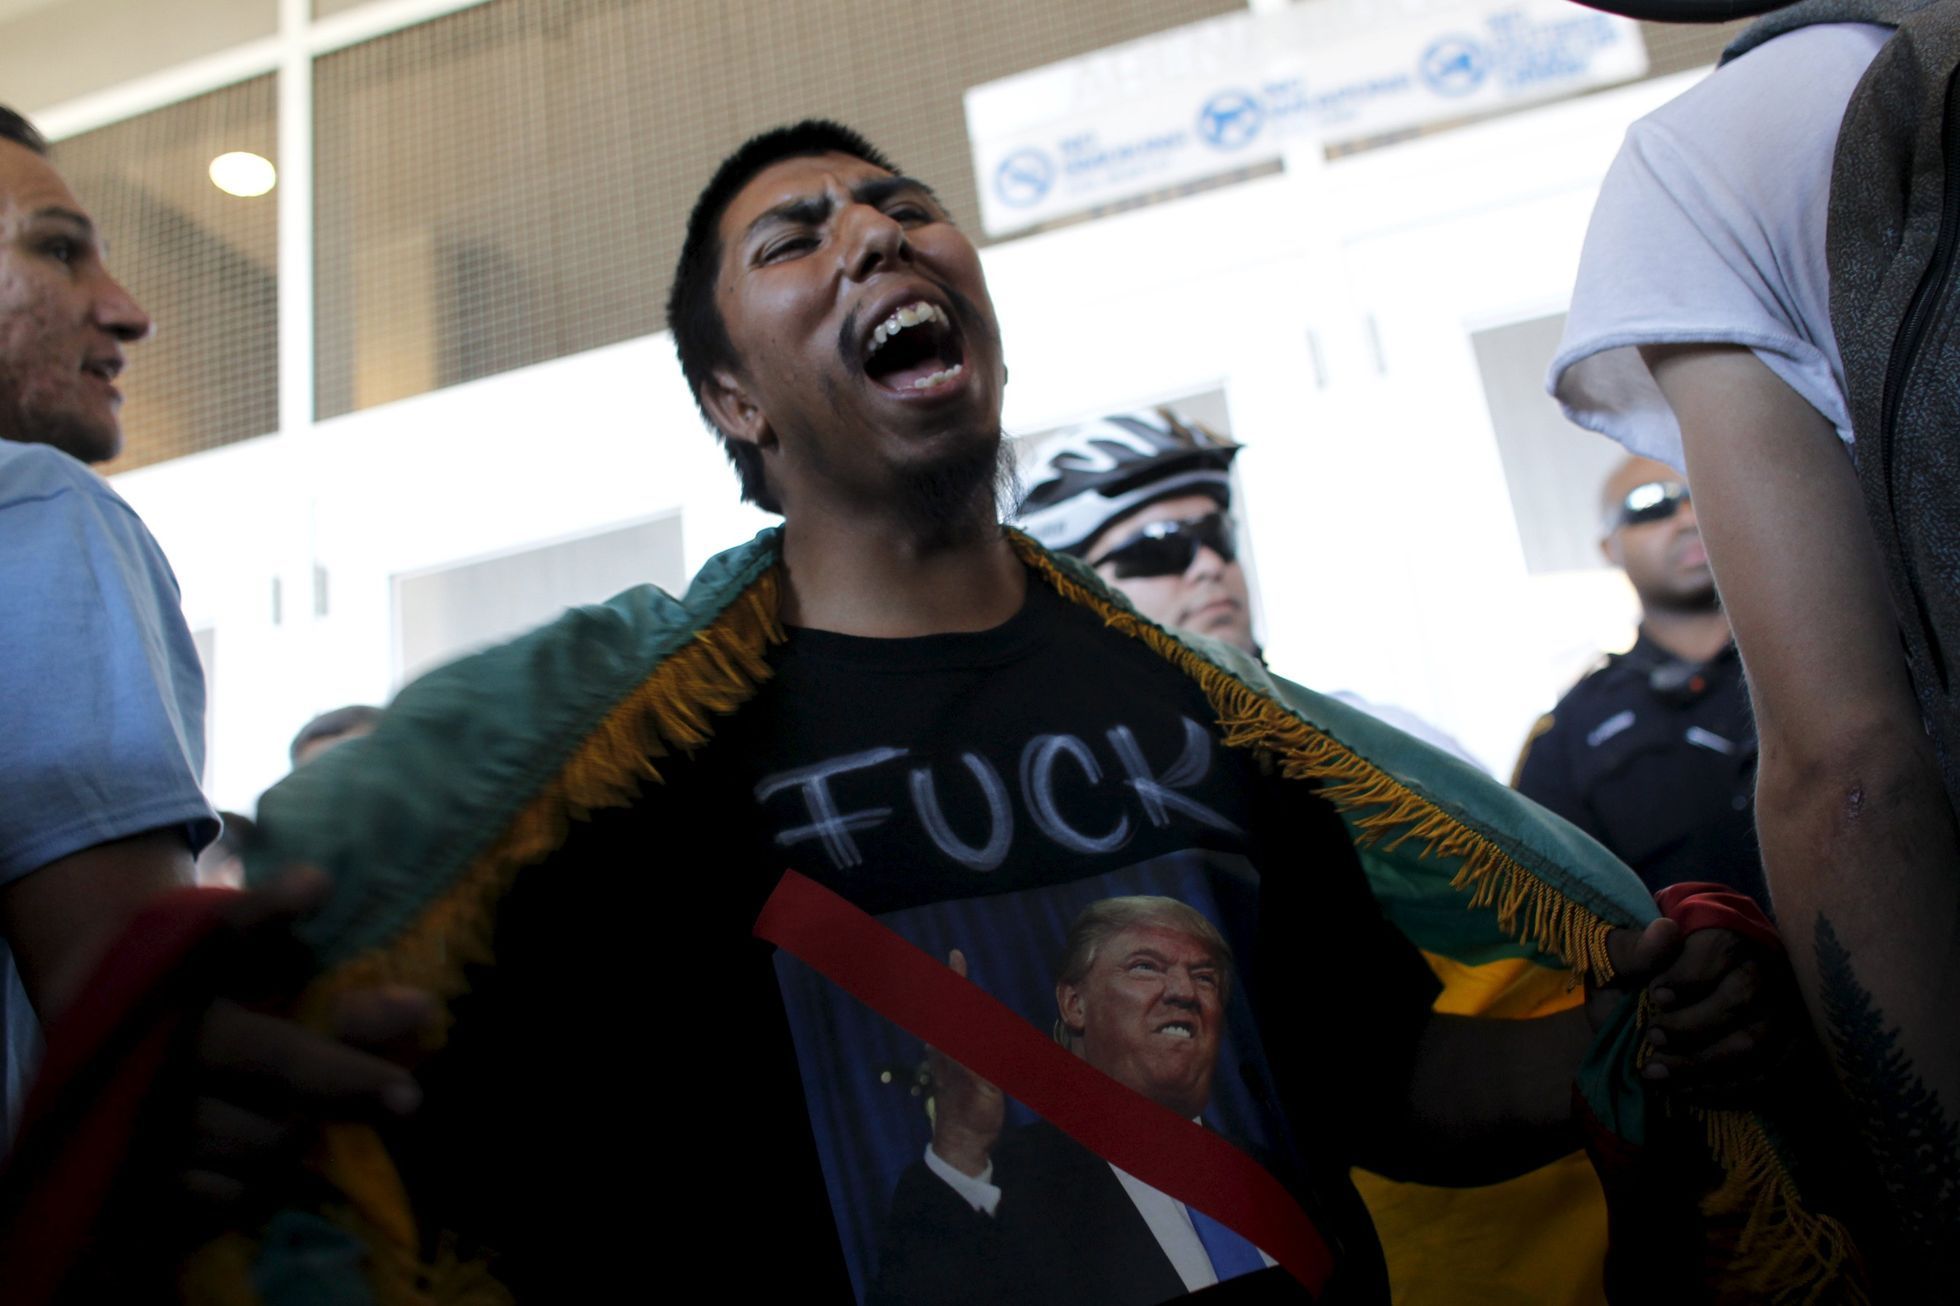 A demonstrator against Republican U.S. presidential candidate Donald Trump protests during a Trump campaign rally in Tucson, Arizona